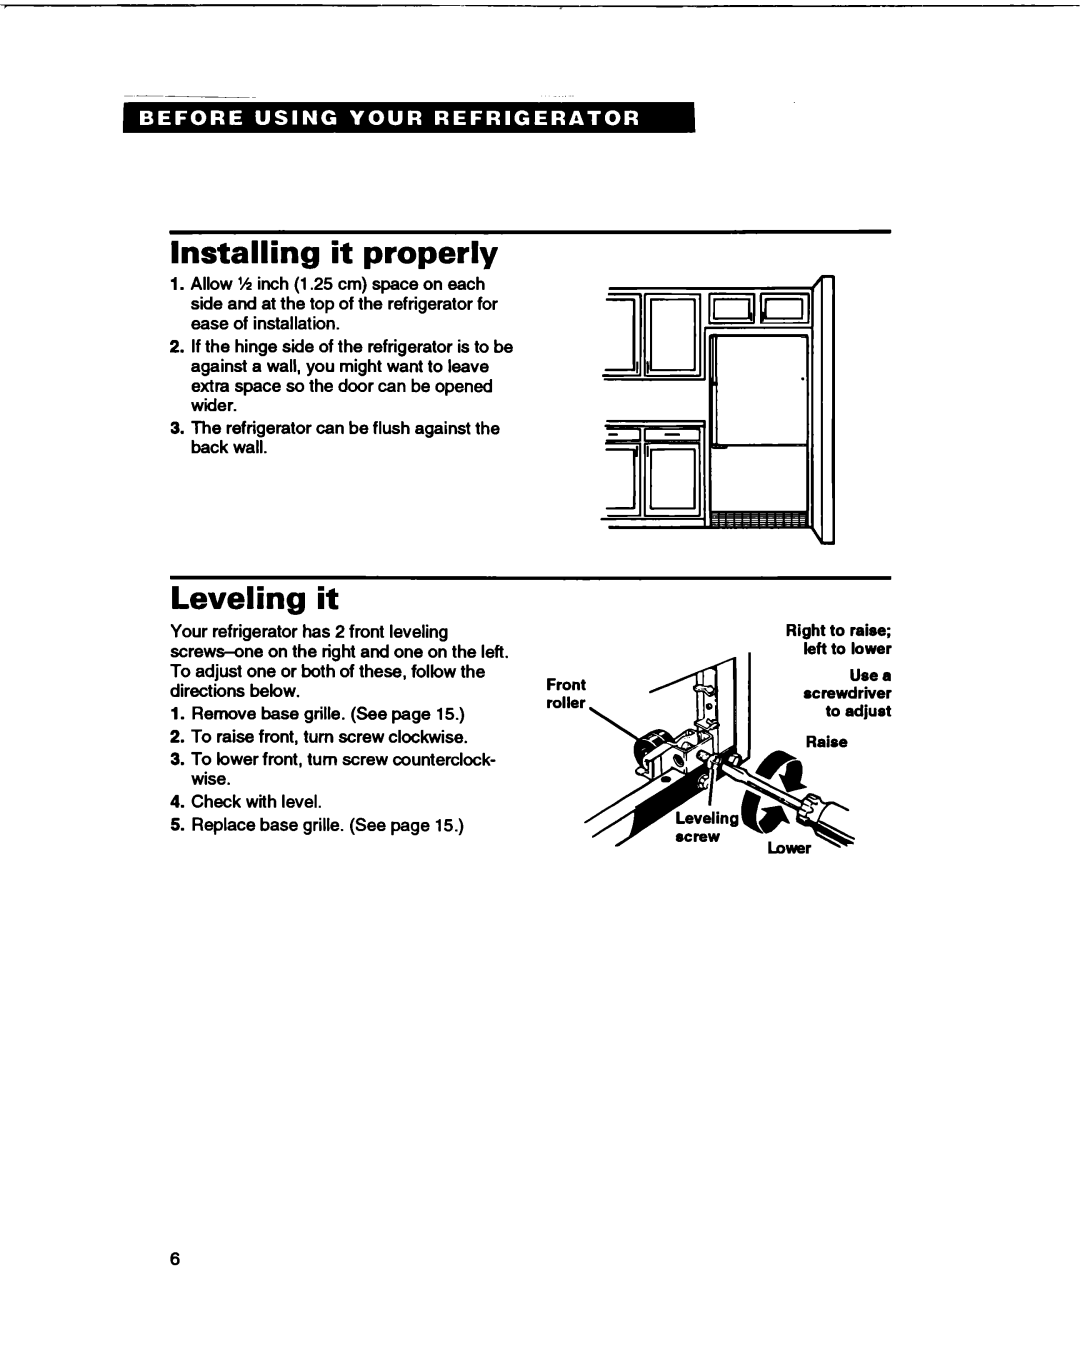 Whirlpool B2lDK important safety instructions Installing it properly, Leveling it 